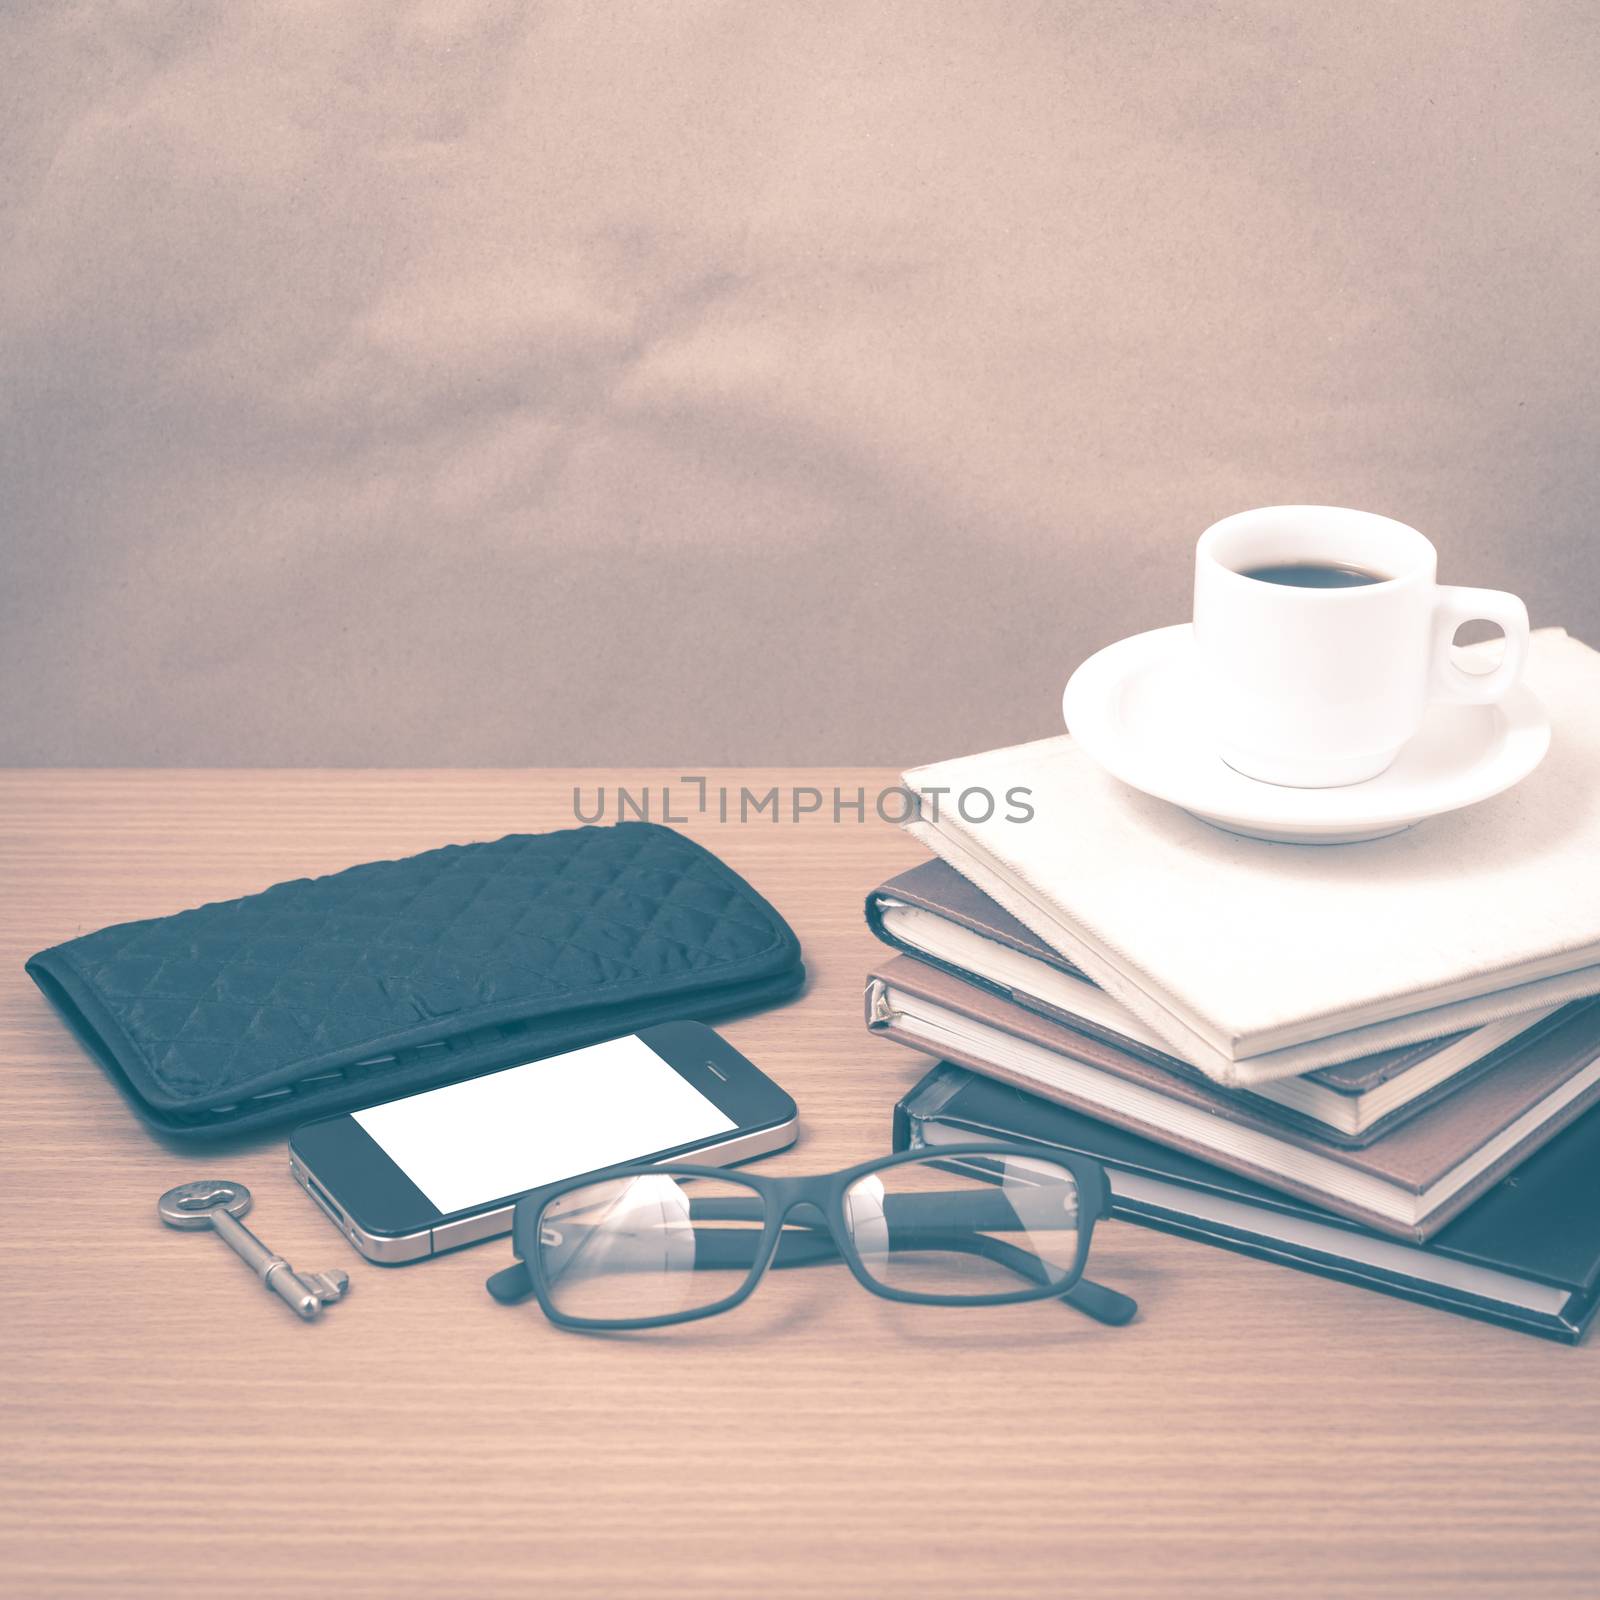 coffee and phone with stack of book,key,eyeglasses and wallet on wood background vintage style